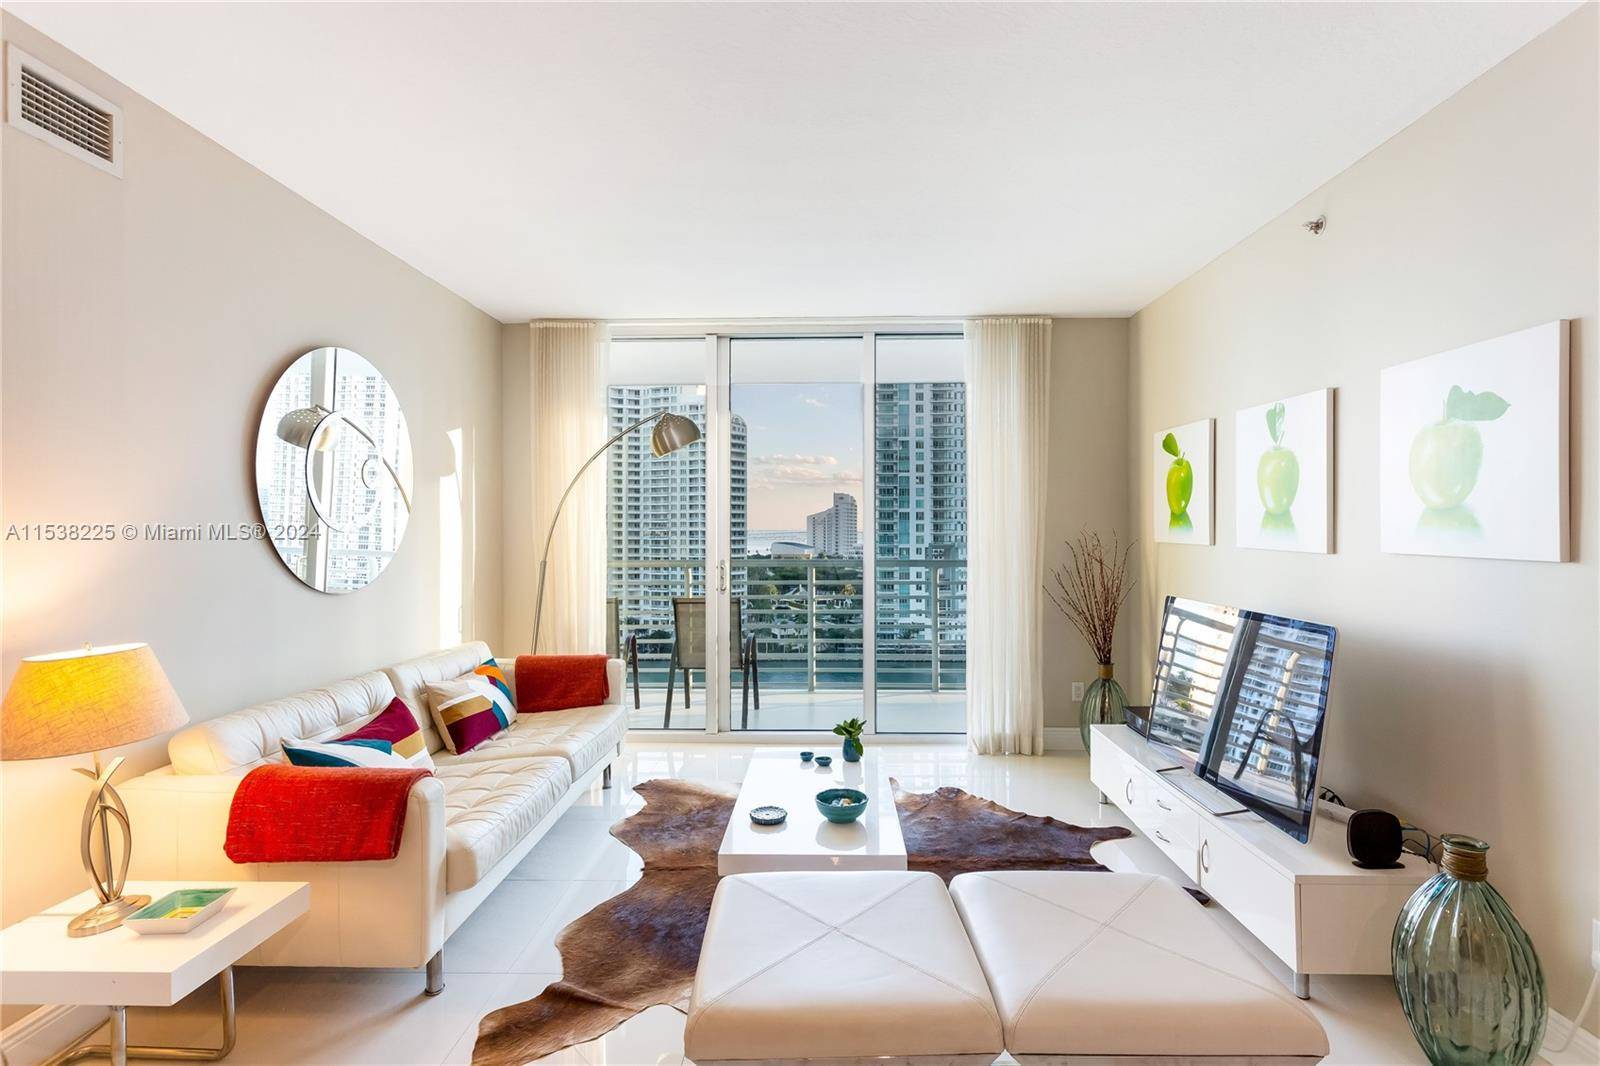 Beautiful fully furnished 2 bedrooms 2 baths condo overlooking the Miami River, Biscayne Bay, and Brickell Skyline.